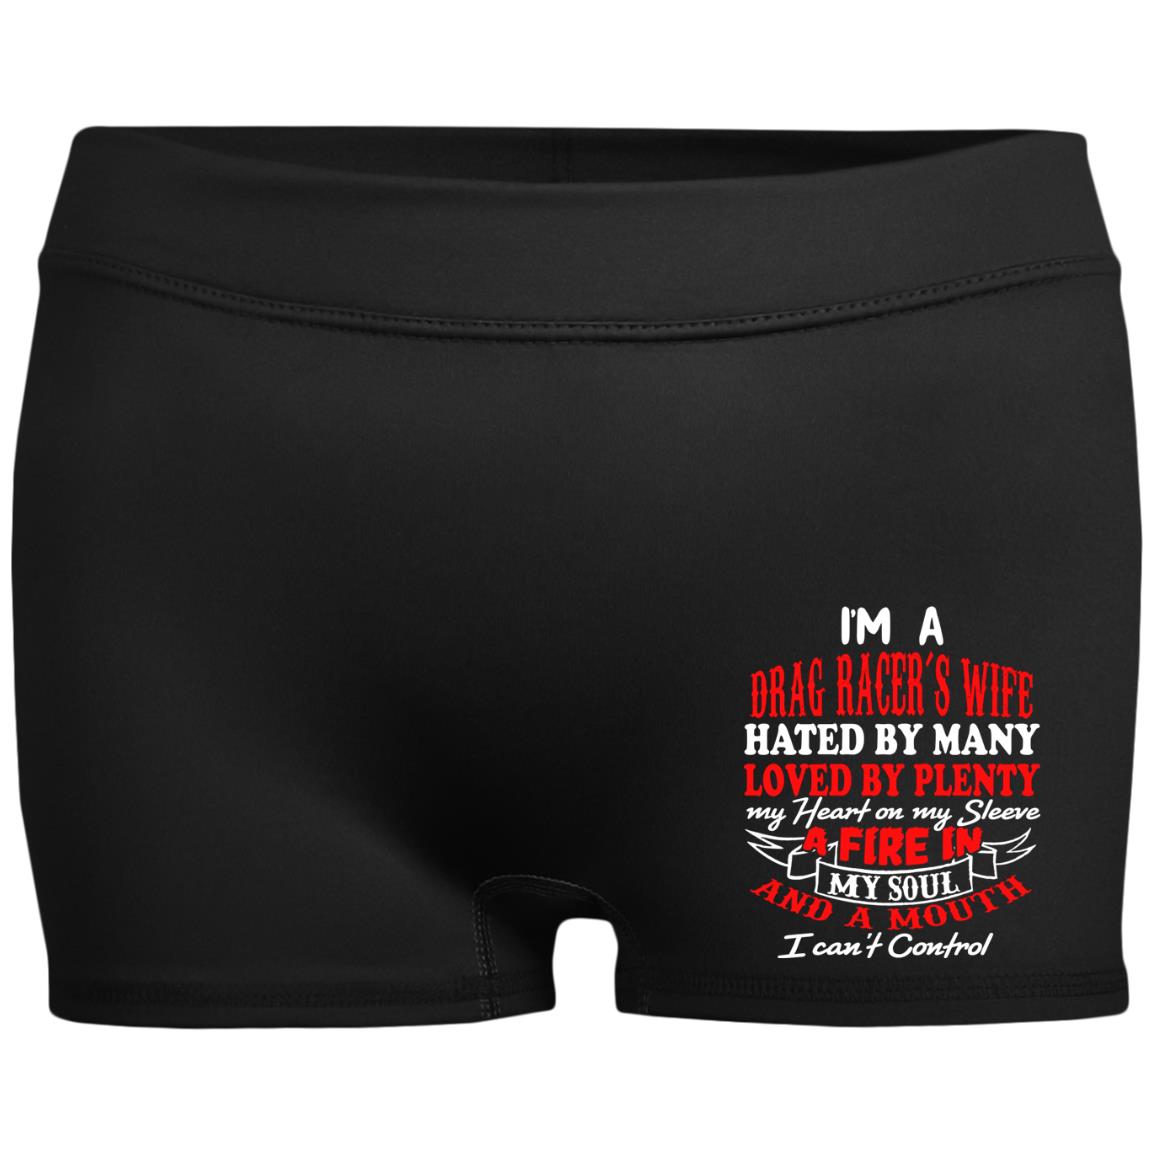 I'm A Drag Racer's Wife Hated By Many Loved By Plenty Ladies' Fitted Moisture-Wicking 2.5 inch Inseam Shorts